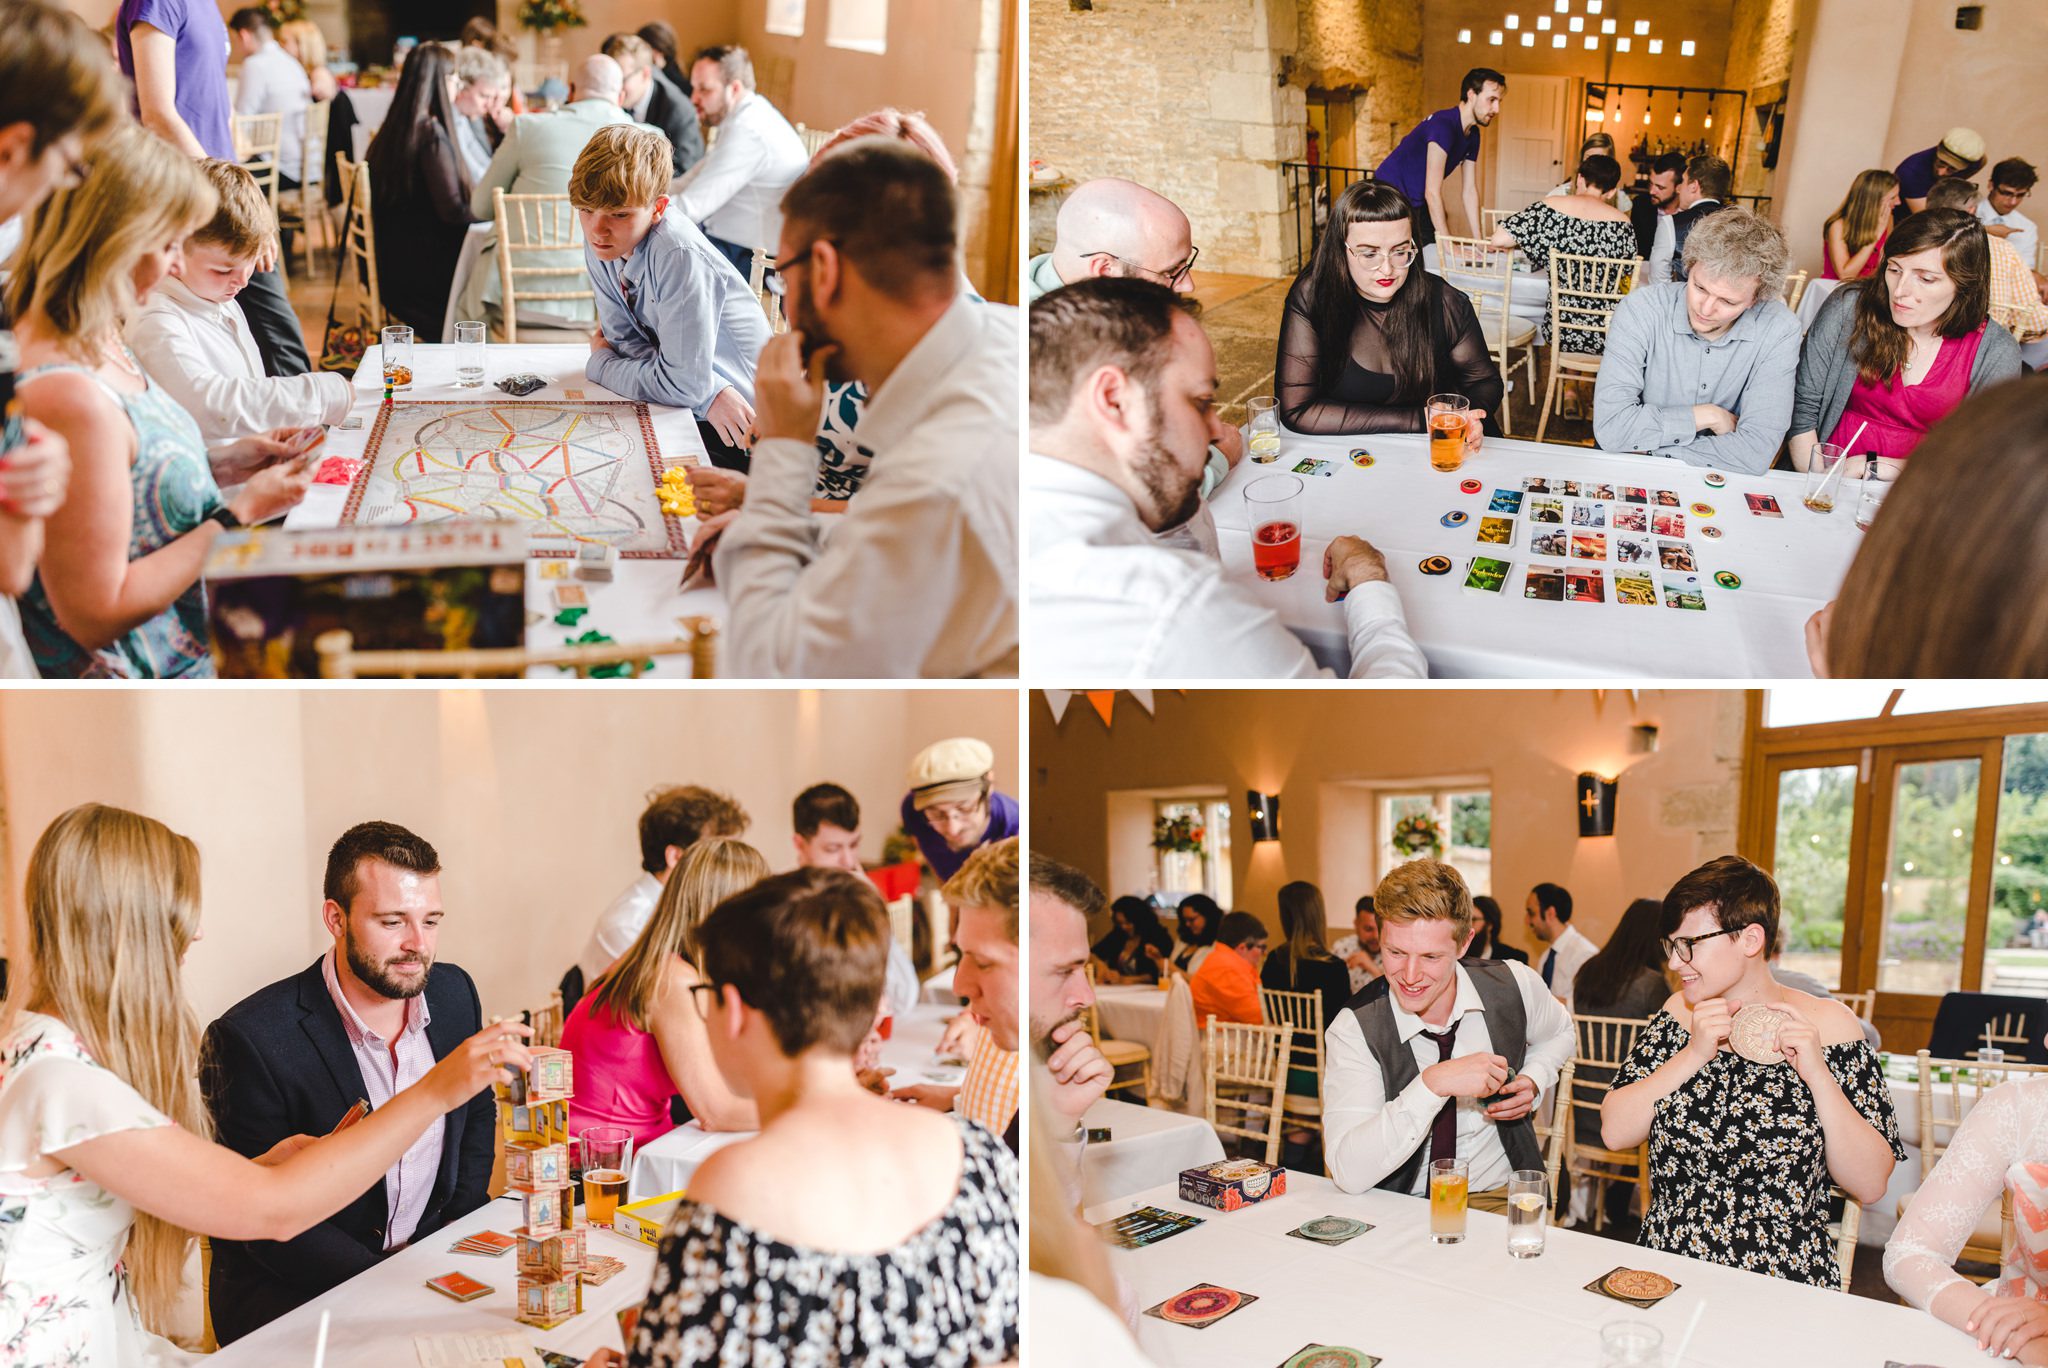 Guests playing board games at a wedding